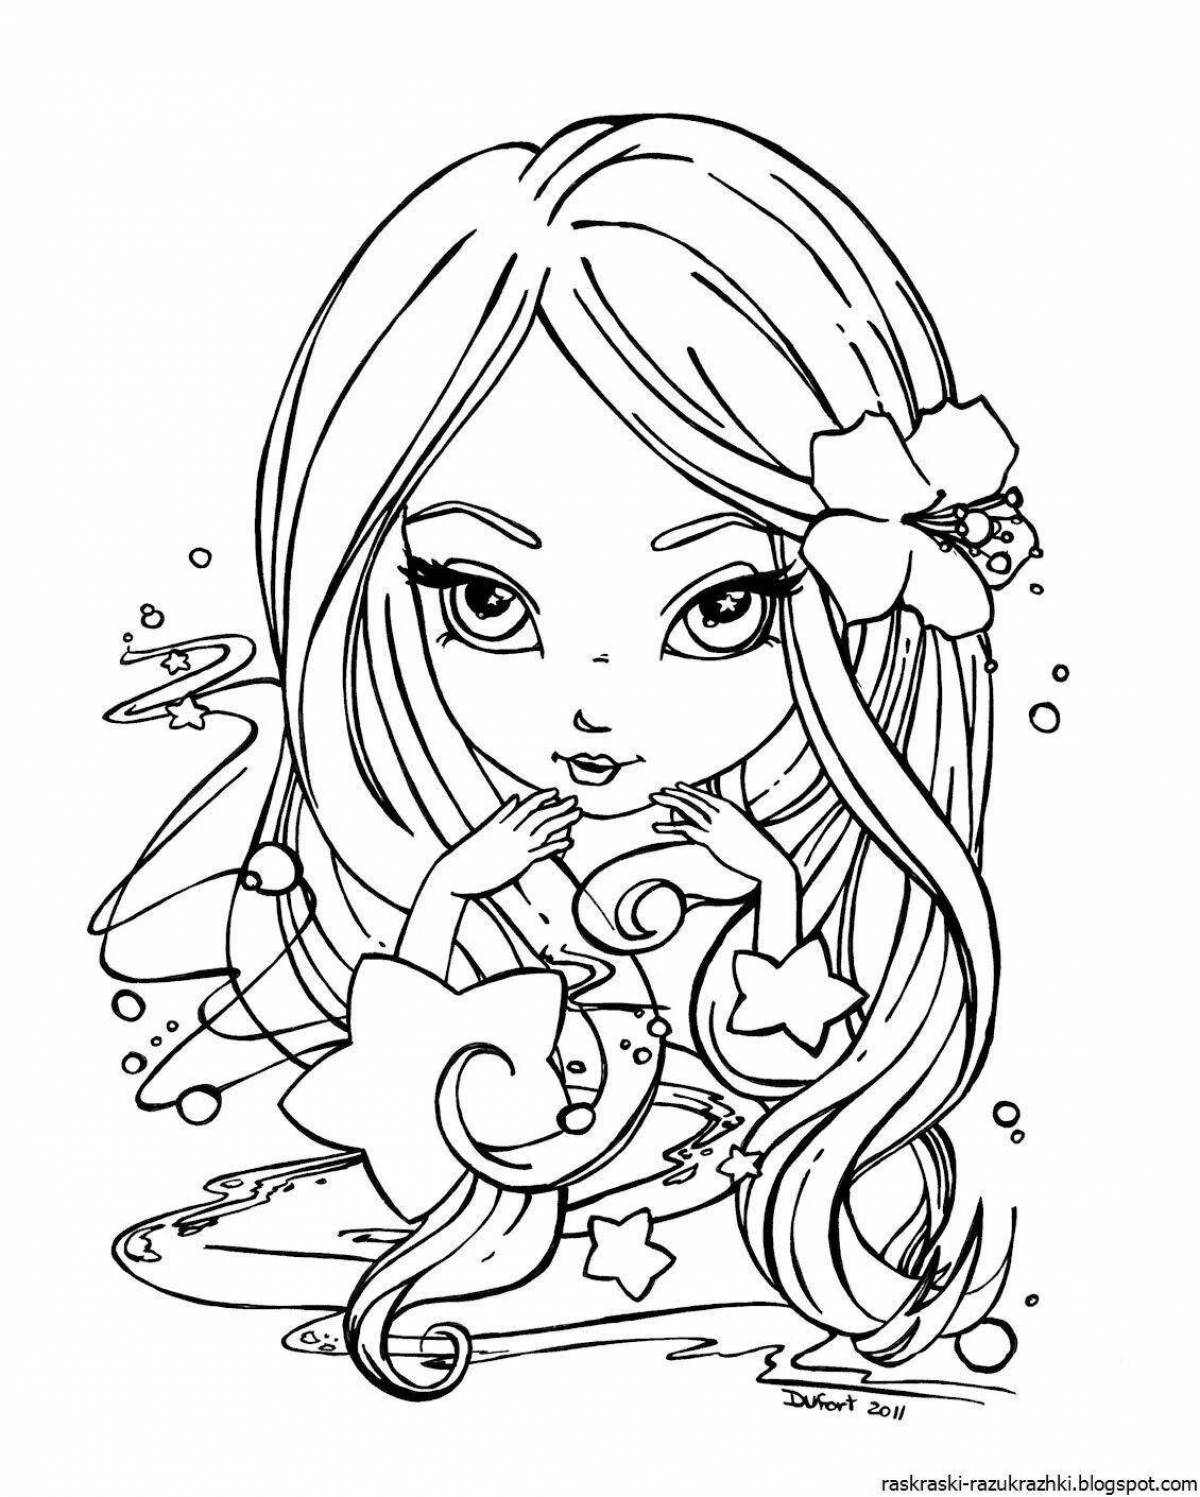 Creative coloring pages for girls 10 years old